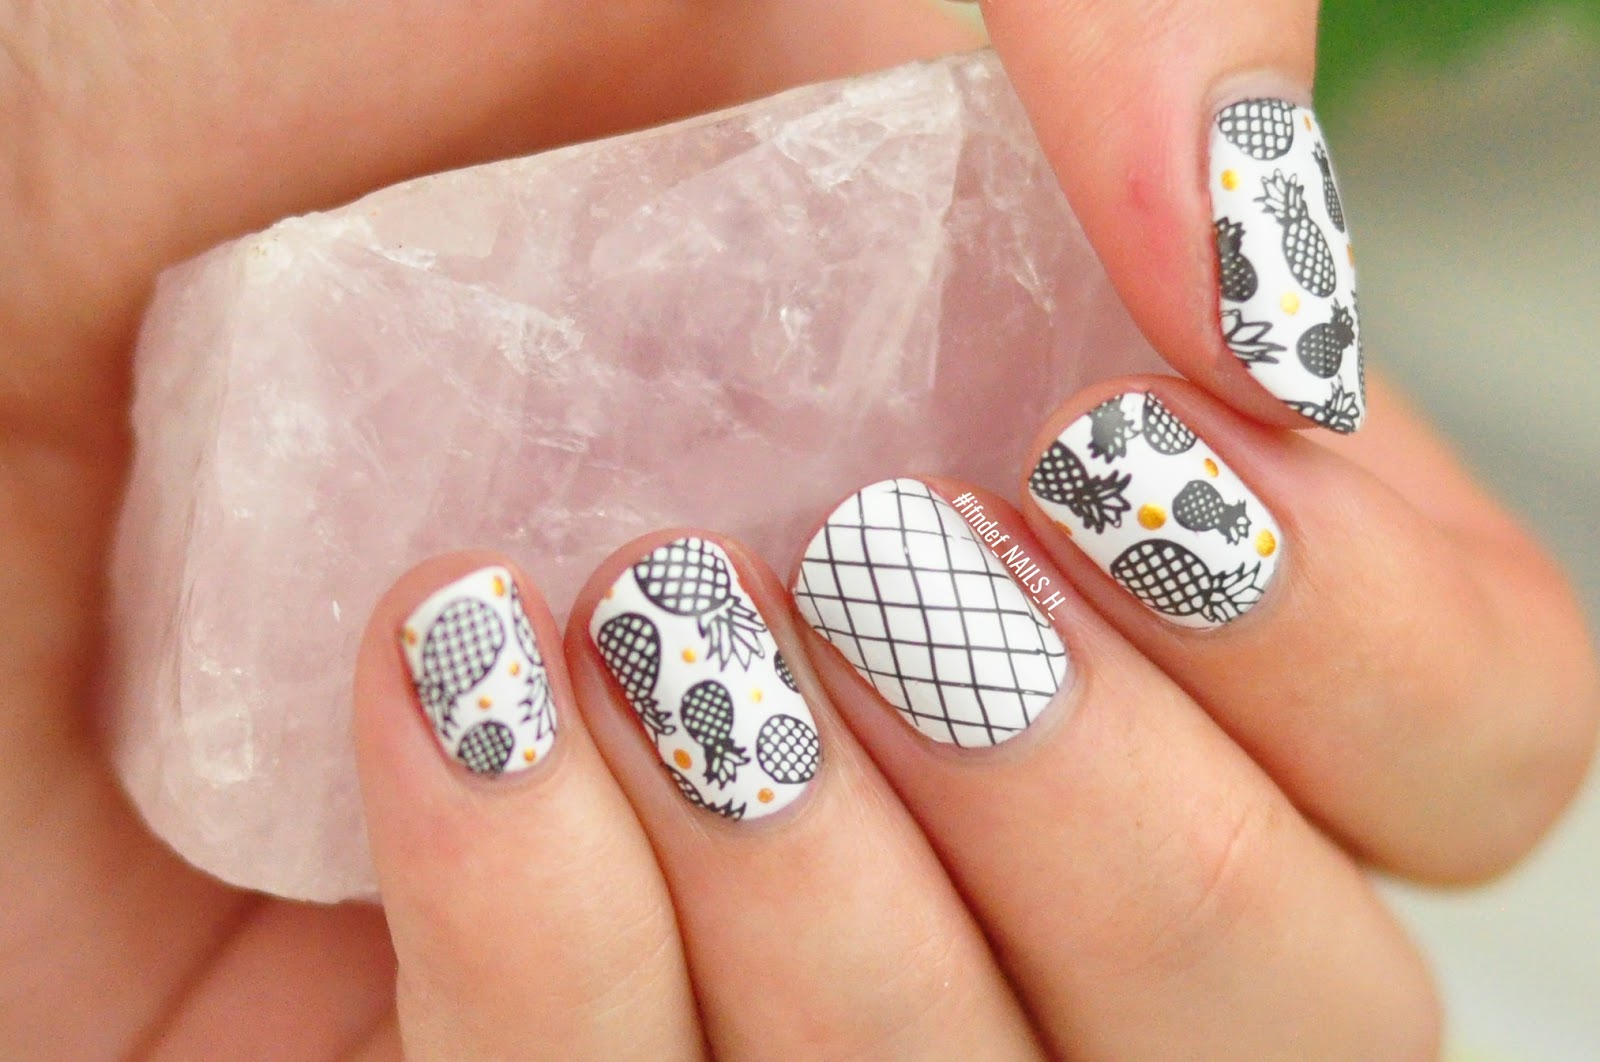 5. "Watercolor Nail Art Stickers" by Twinkled T - wide 8